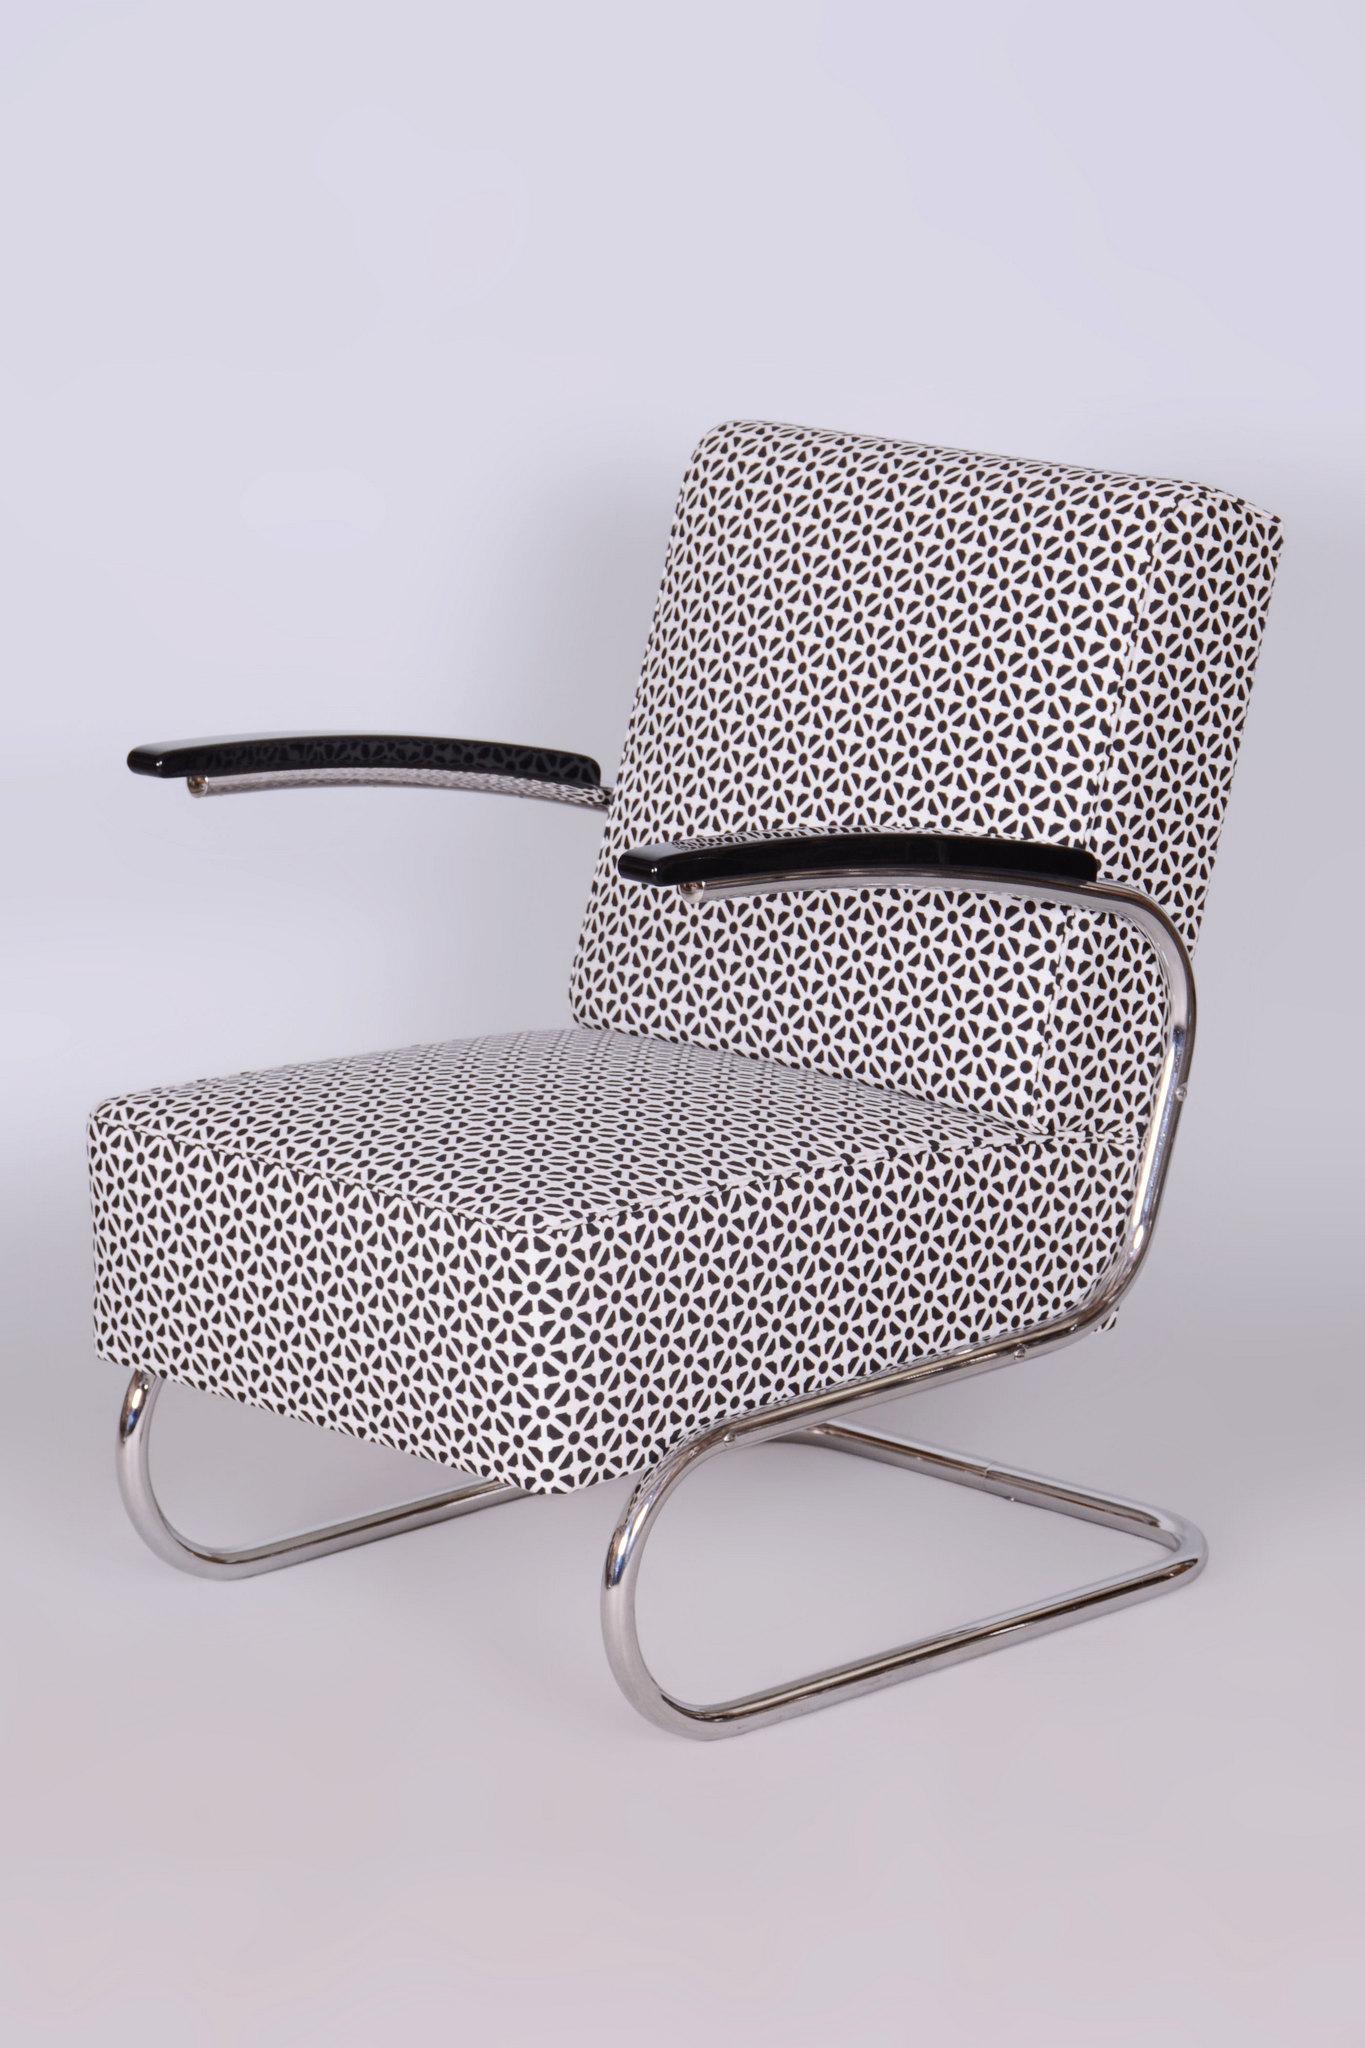 Set of Two Restored Bauhaus Armchairs, by Mücke Melder, Chrome, Czech, 1930s For Sale 5